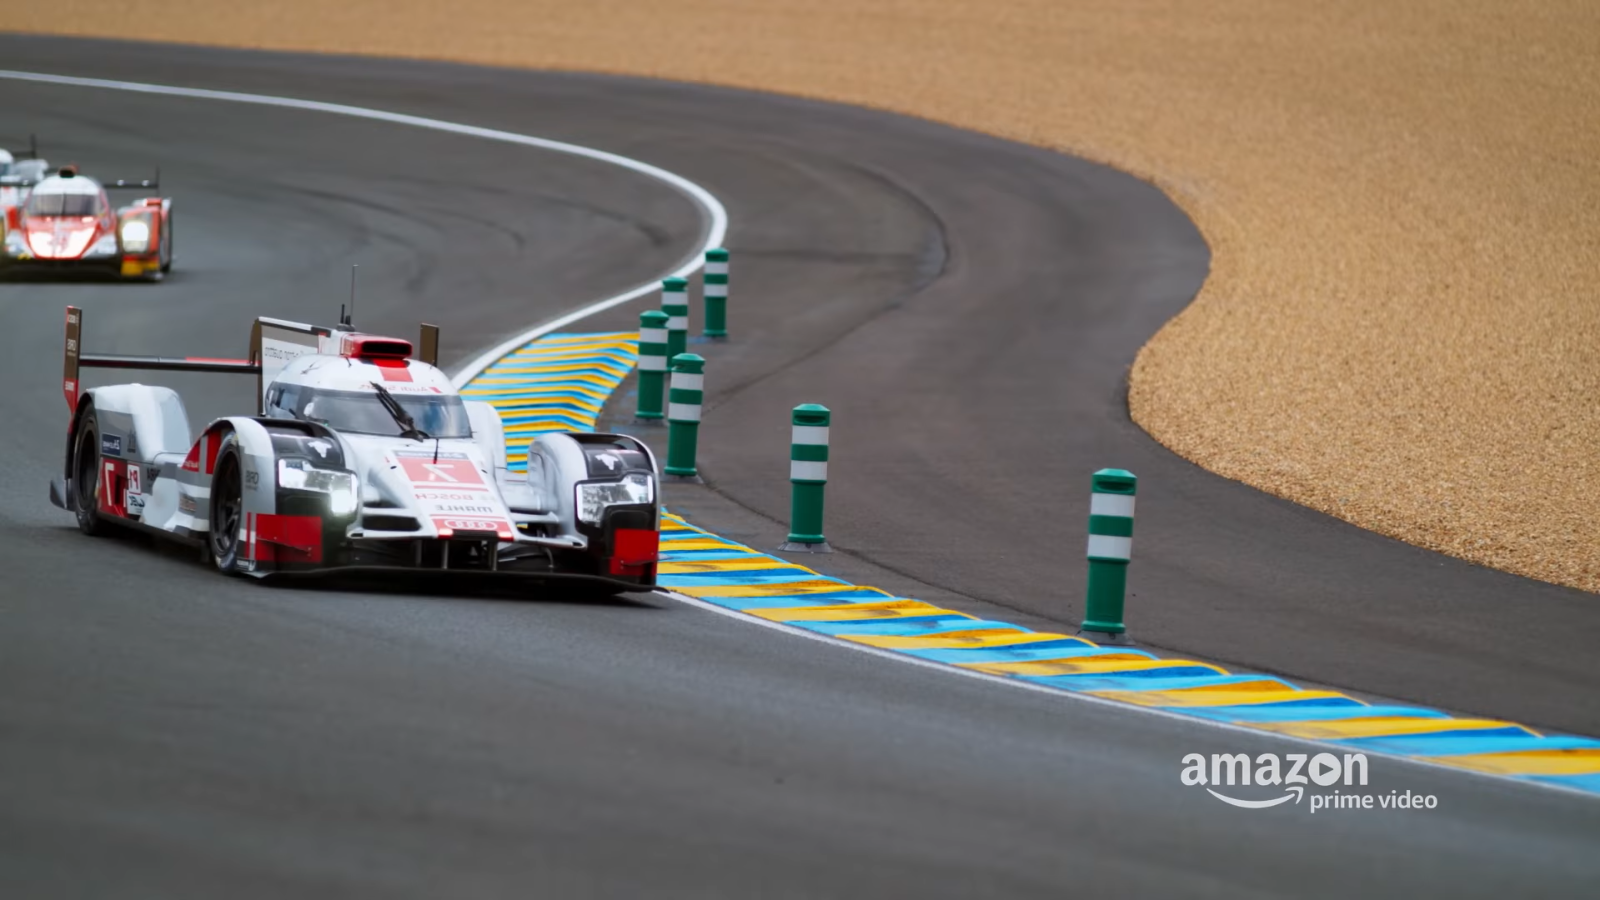 Watch The Trailer For Amazon’s New Series Highlighting the 24 Hours of Le Mans